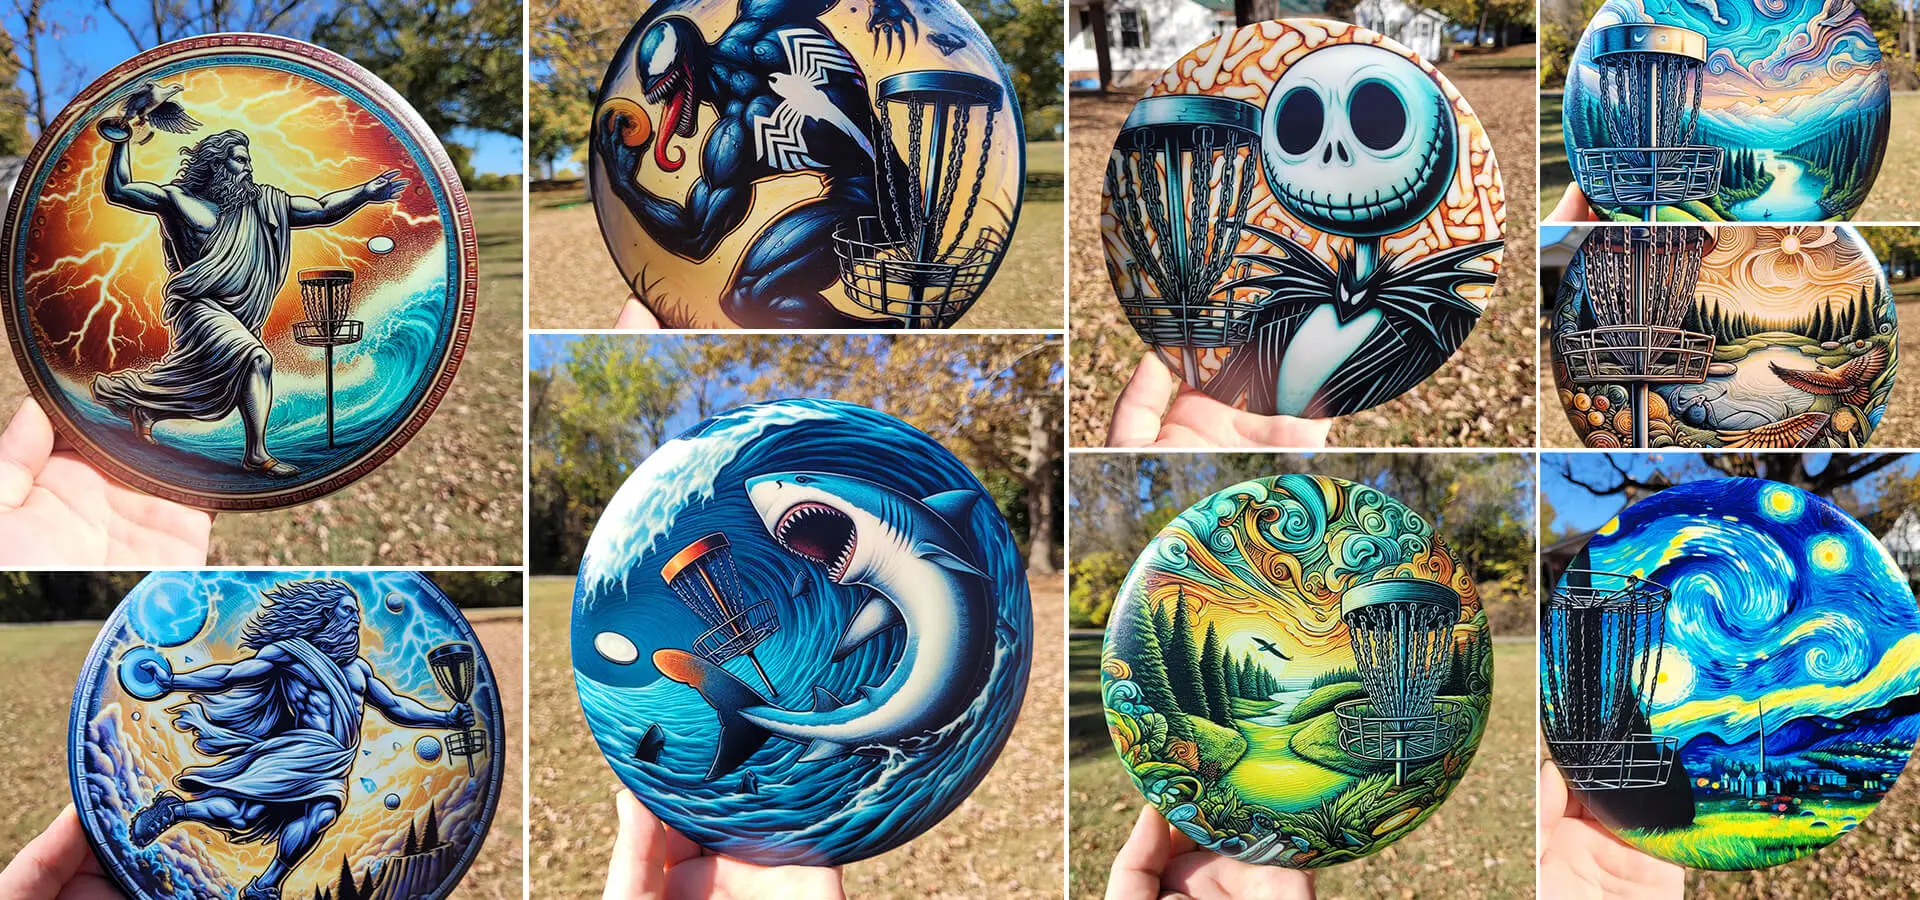 A series of pictures showing different designs on frisbees.